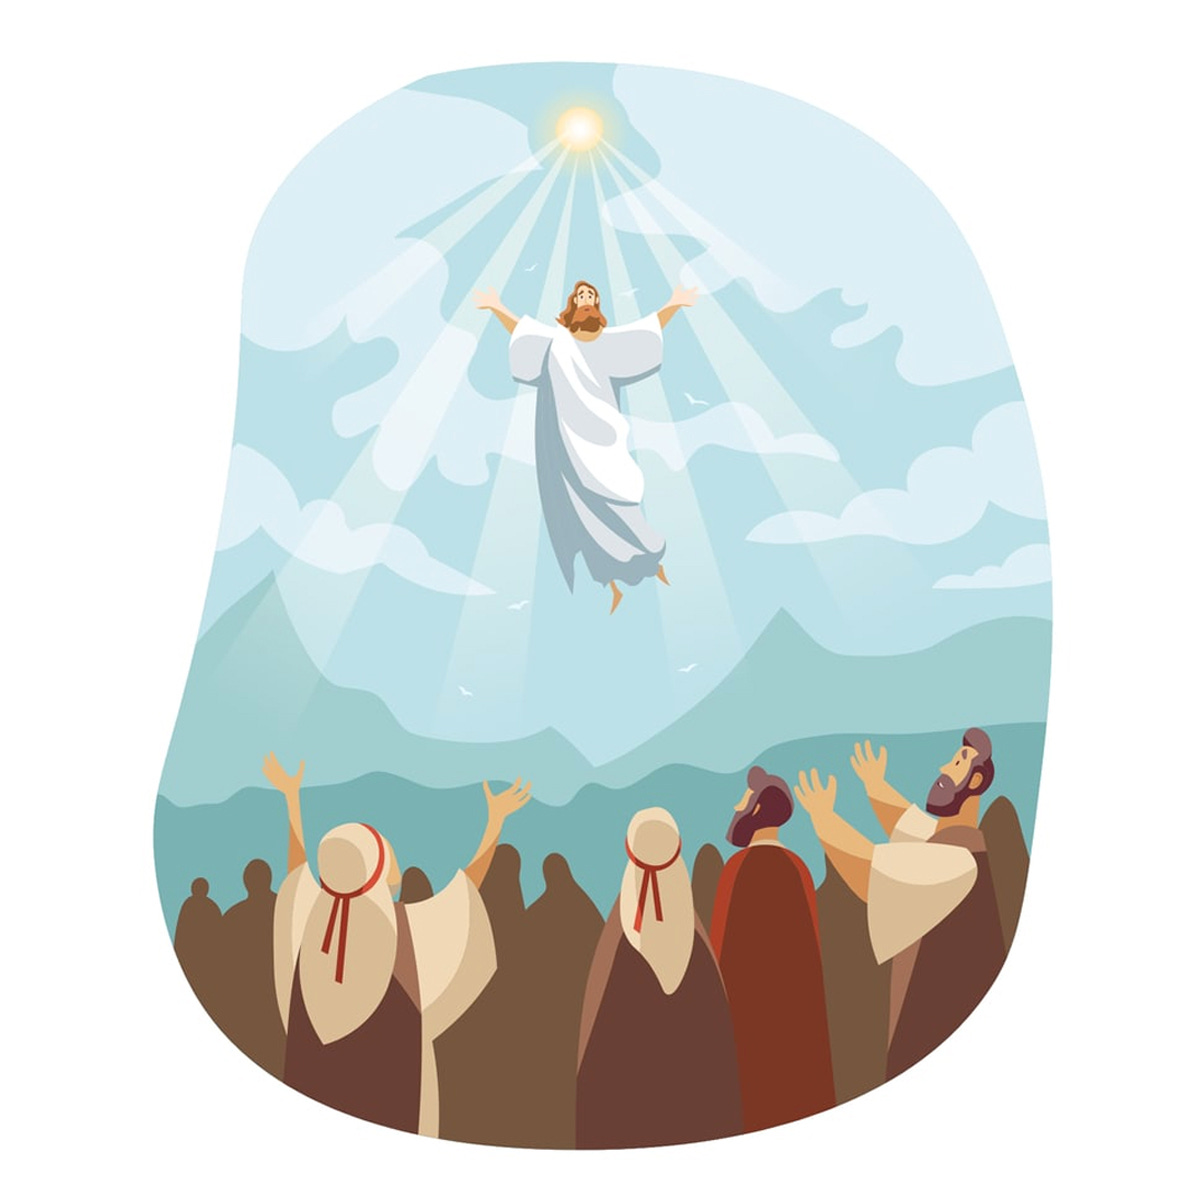 ASCENSION DAY - May 18, 2023 - National Today